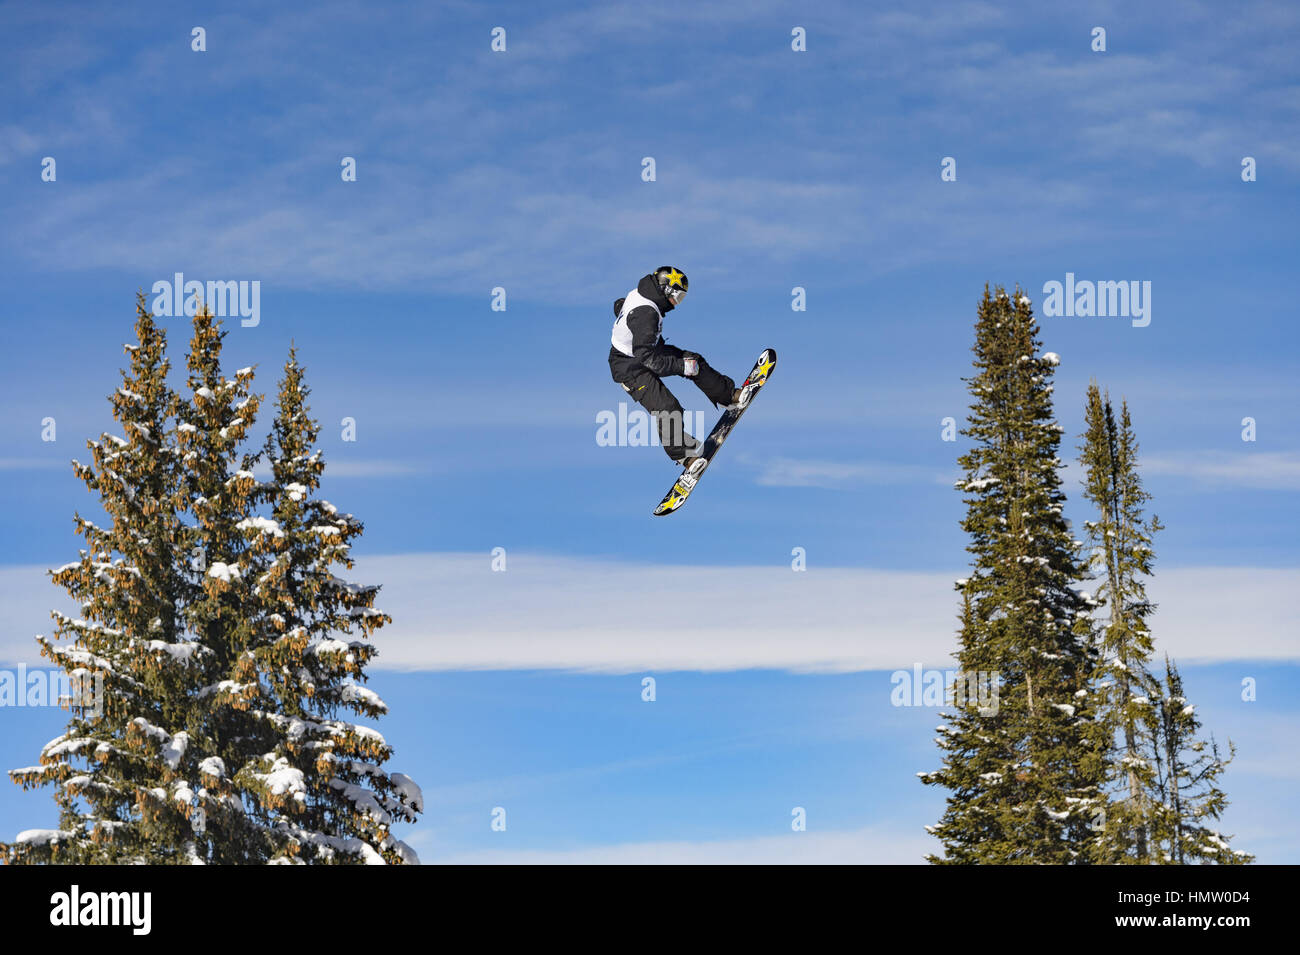 Aspen, Colorado, USA. 28th Jan, 2017. Aspen CO, U.S. - CHERYL MAAS flies through the air during the Women's Snowboard Slopestyle Final on day 3 of the of Winter X Games 2017 at Colorado's Buttermilk Mountain. Credit: Marshall Foster/ZUMA Wire/Alamy Live News Stock Photo